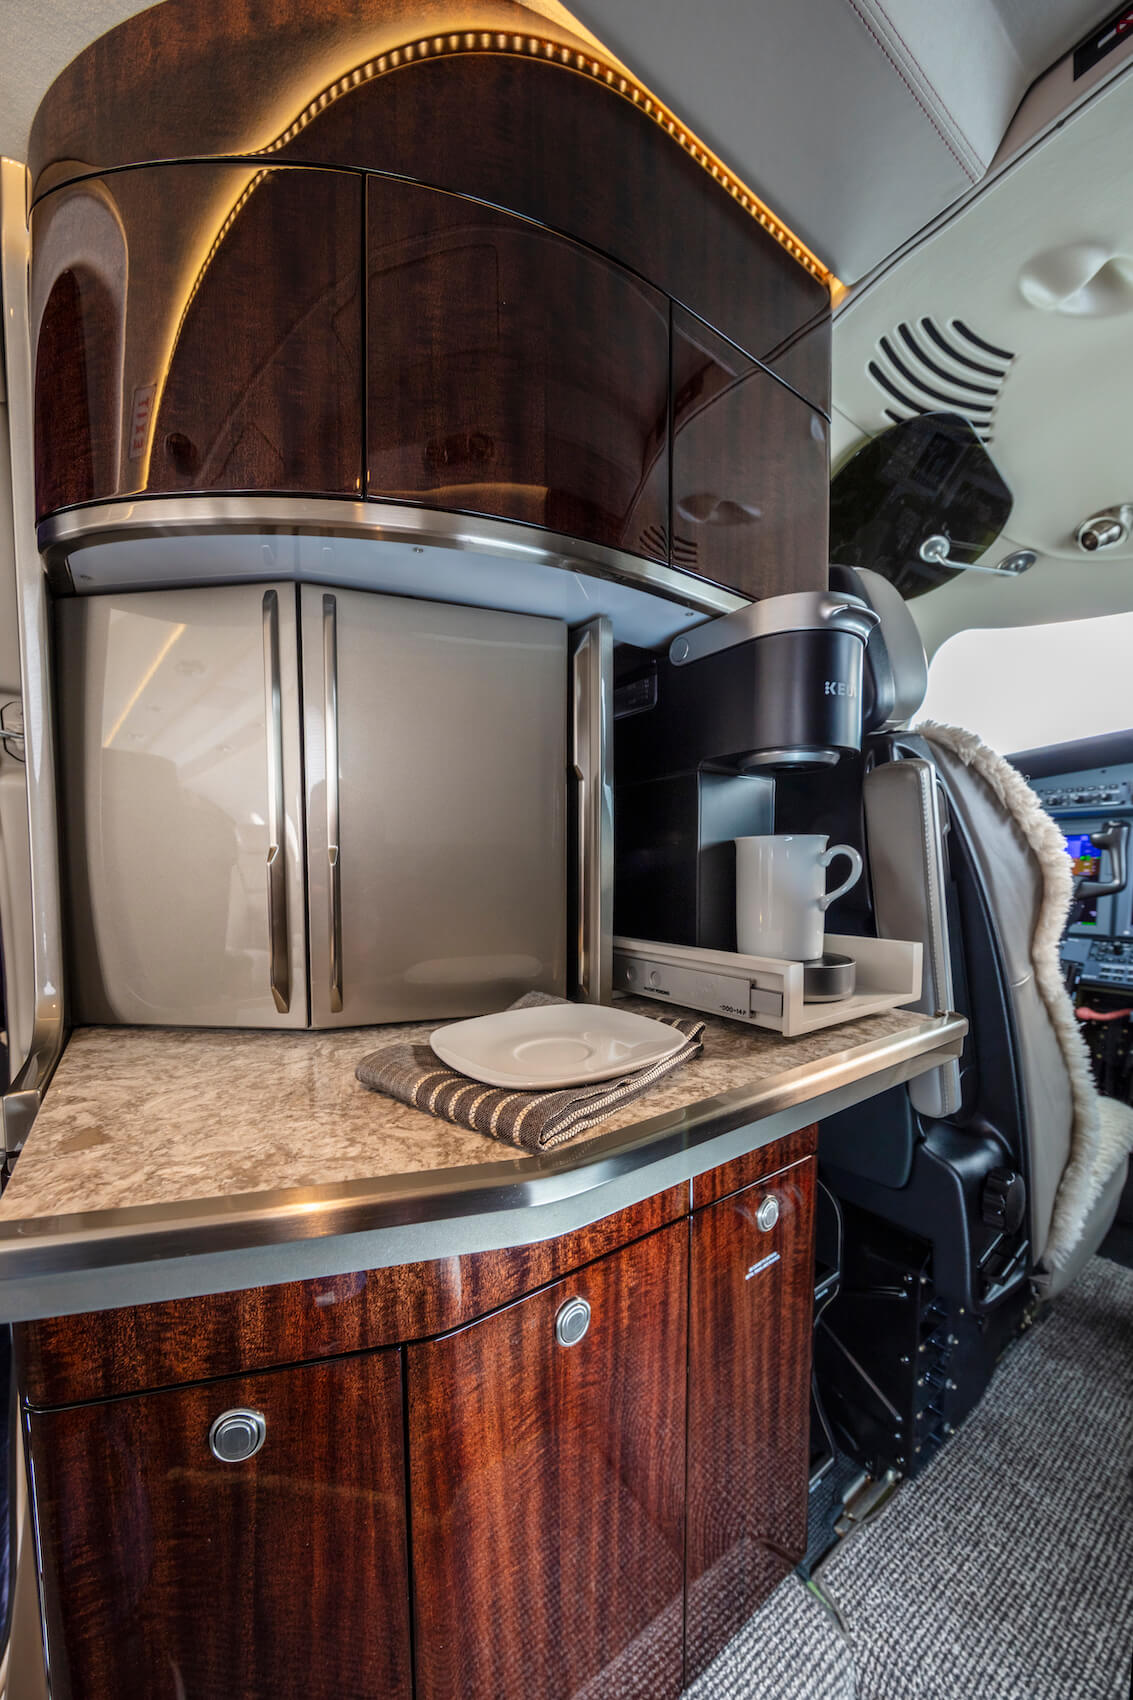 The-Cessna-Citation-CJ4-Gen2’s-galley-/-refreshment-center,-which-features-glossy,-dark-wood-paneling-and-a-coffee-machine.